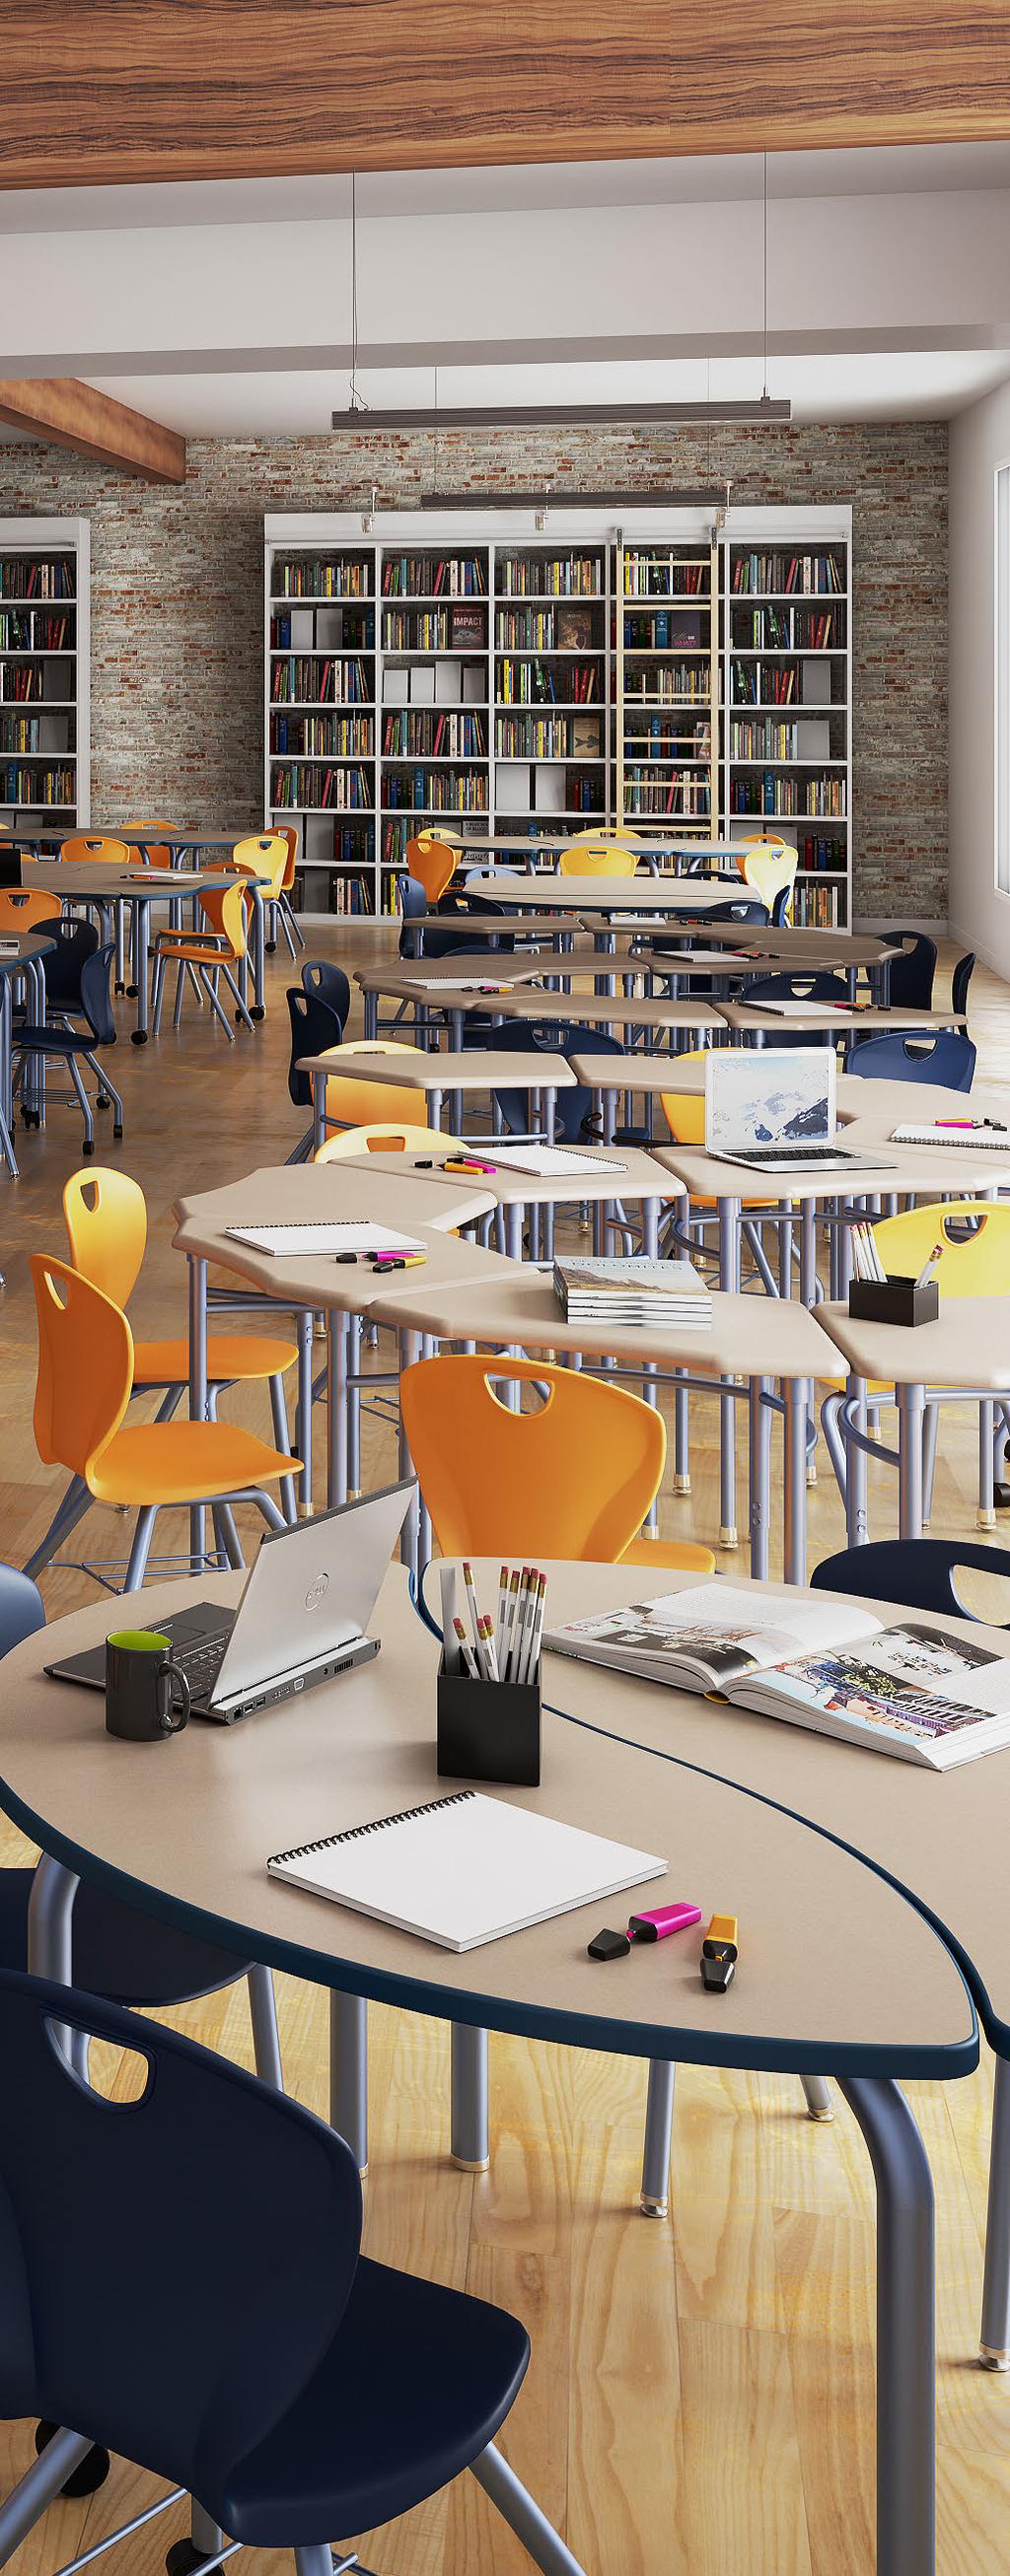 The 2Thrive Caster chair is designed for ease of movement within the classroom or